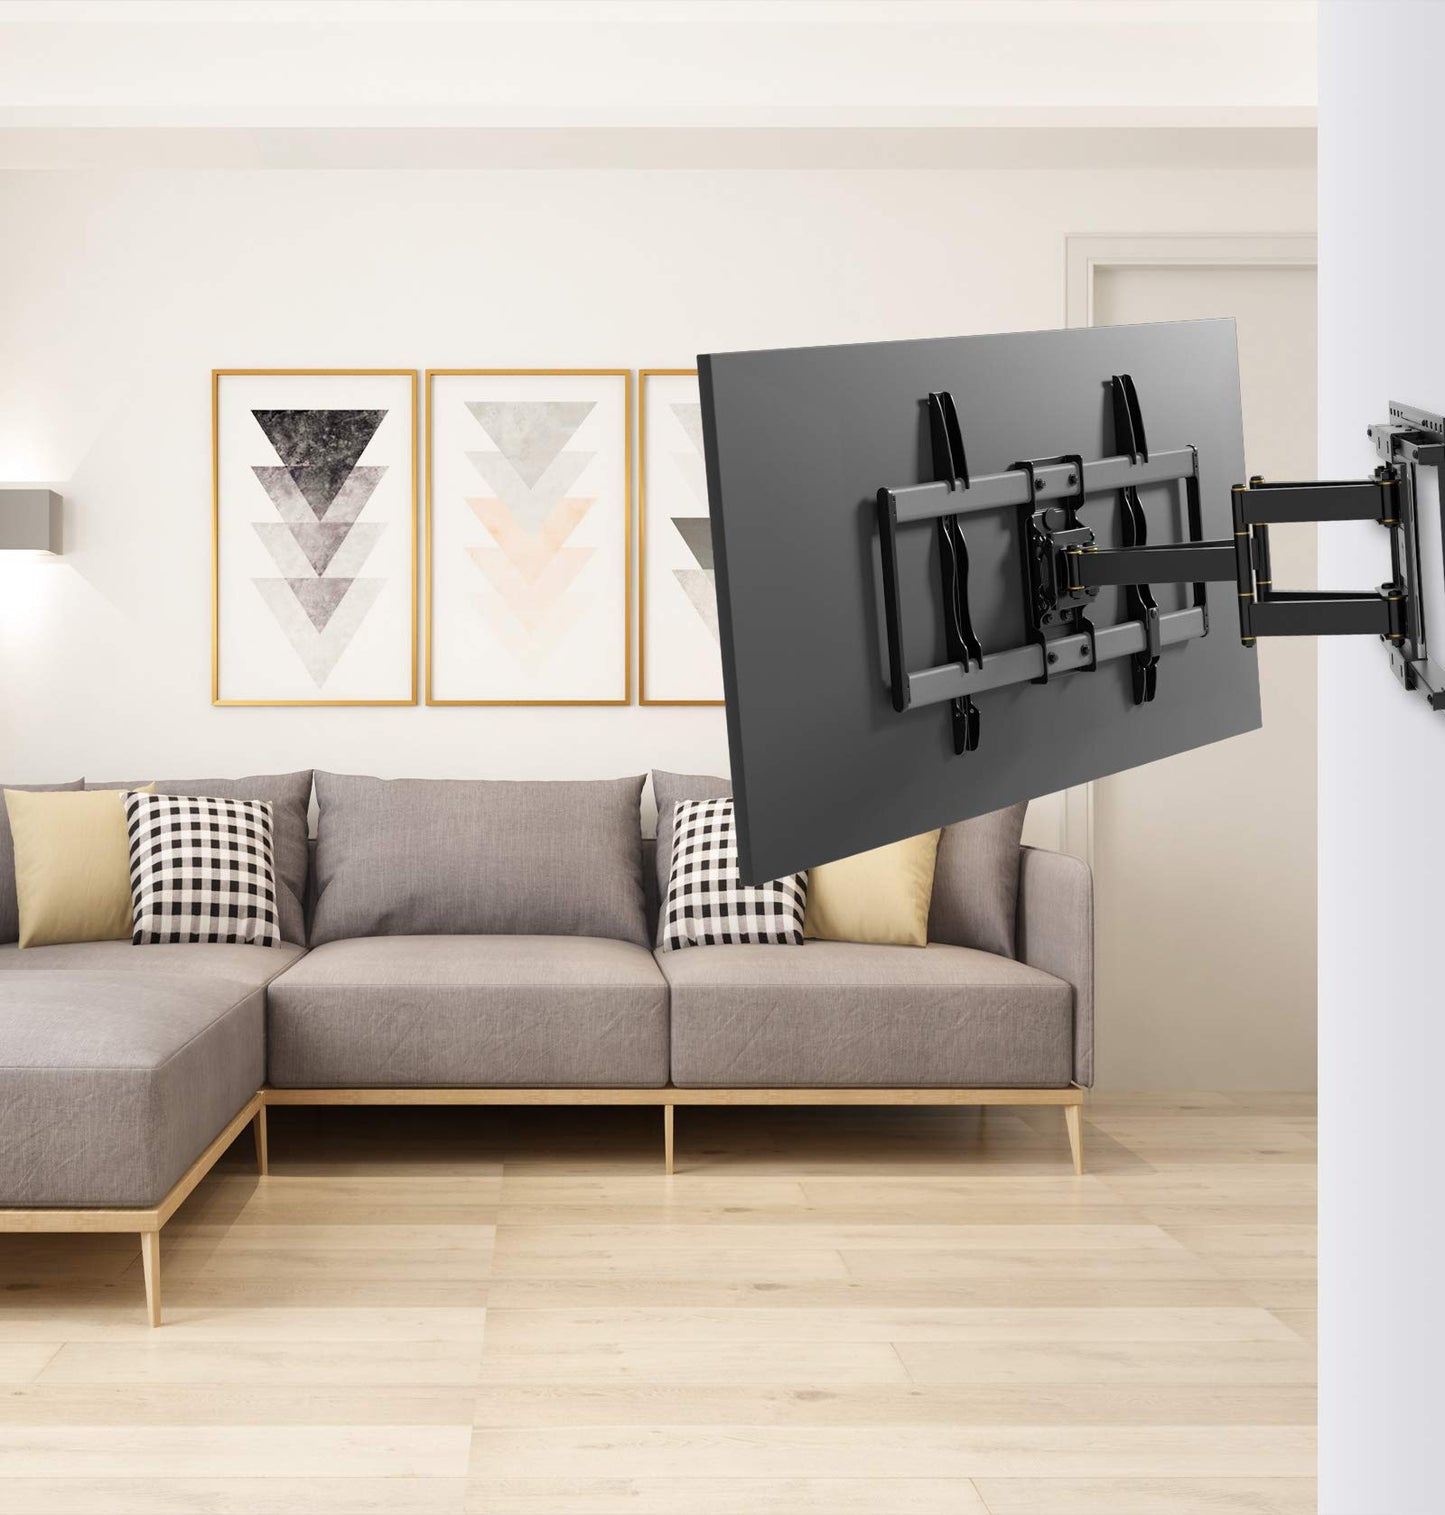 Rentliv TV Mount with Sliding Design for Most 37-80 inch Flat Curved TVs Up to 132 lbs., Full Motion TV Wall Mount with Swivel Articulating Arms, Max VESA 600x400mm, Easy for TV Centering on Wall